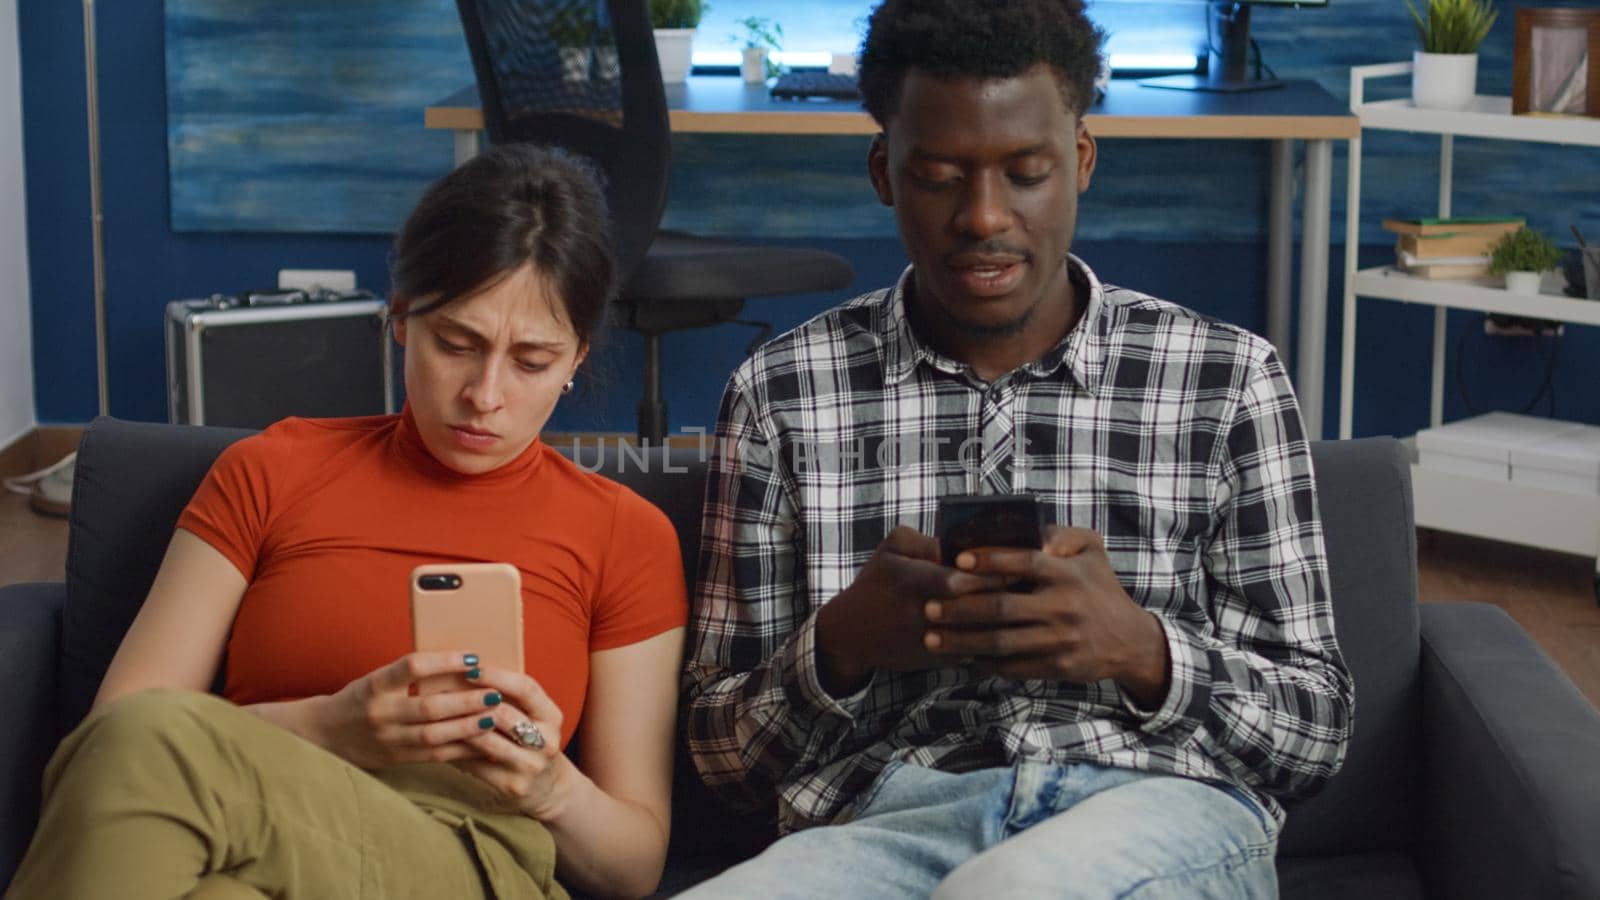 Interracial couple holding smartphones in living room on couch. Modern multi ethnic people with technology sitting together at home on sofa. Husband and wife using phone devices